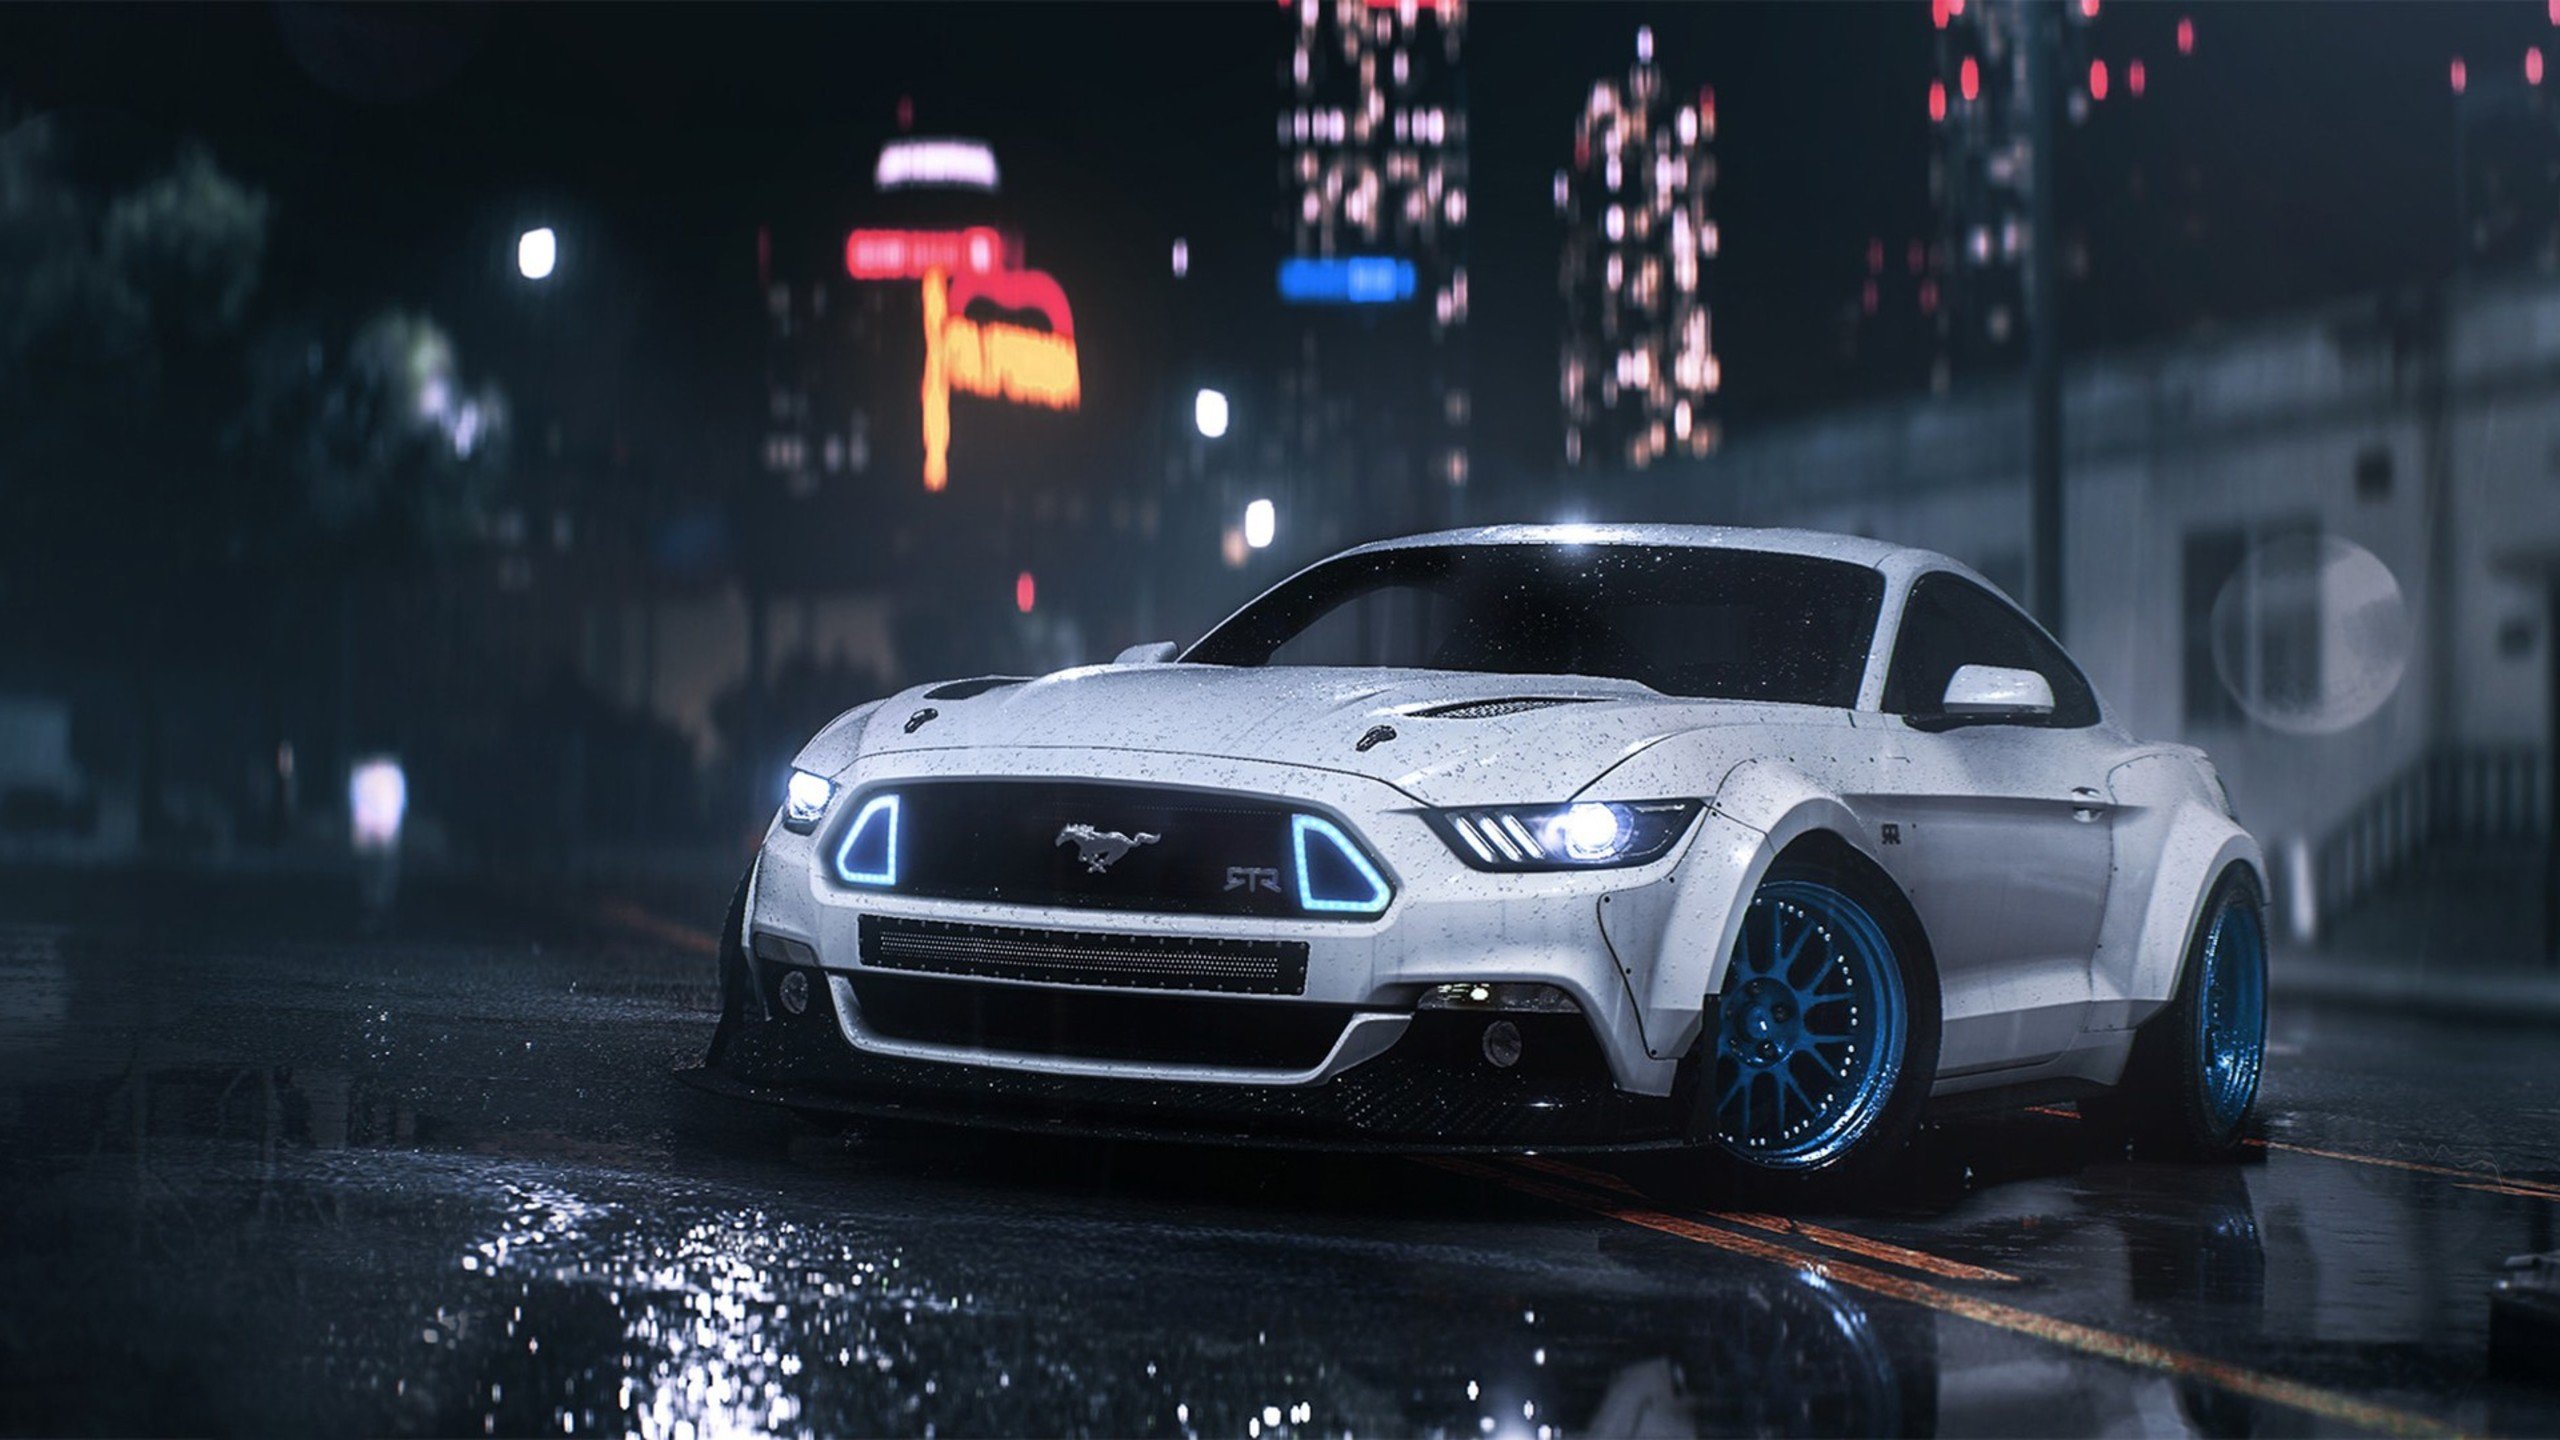 Ford Mustang Fastback Wallpapers